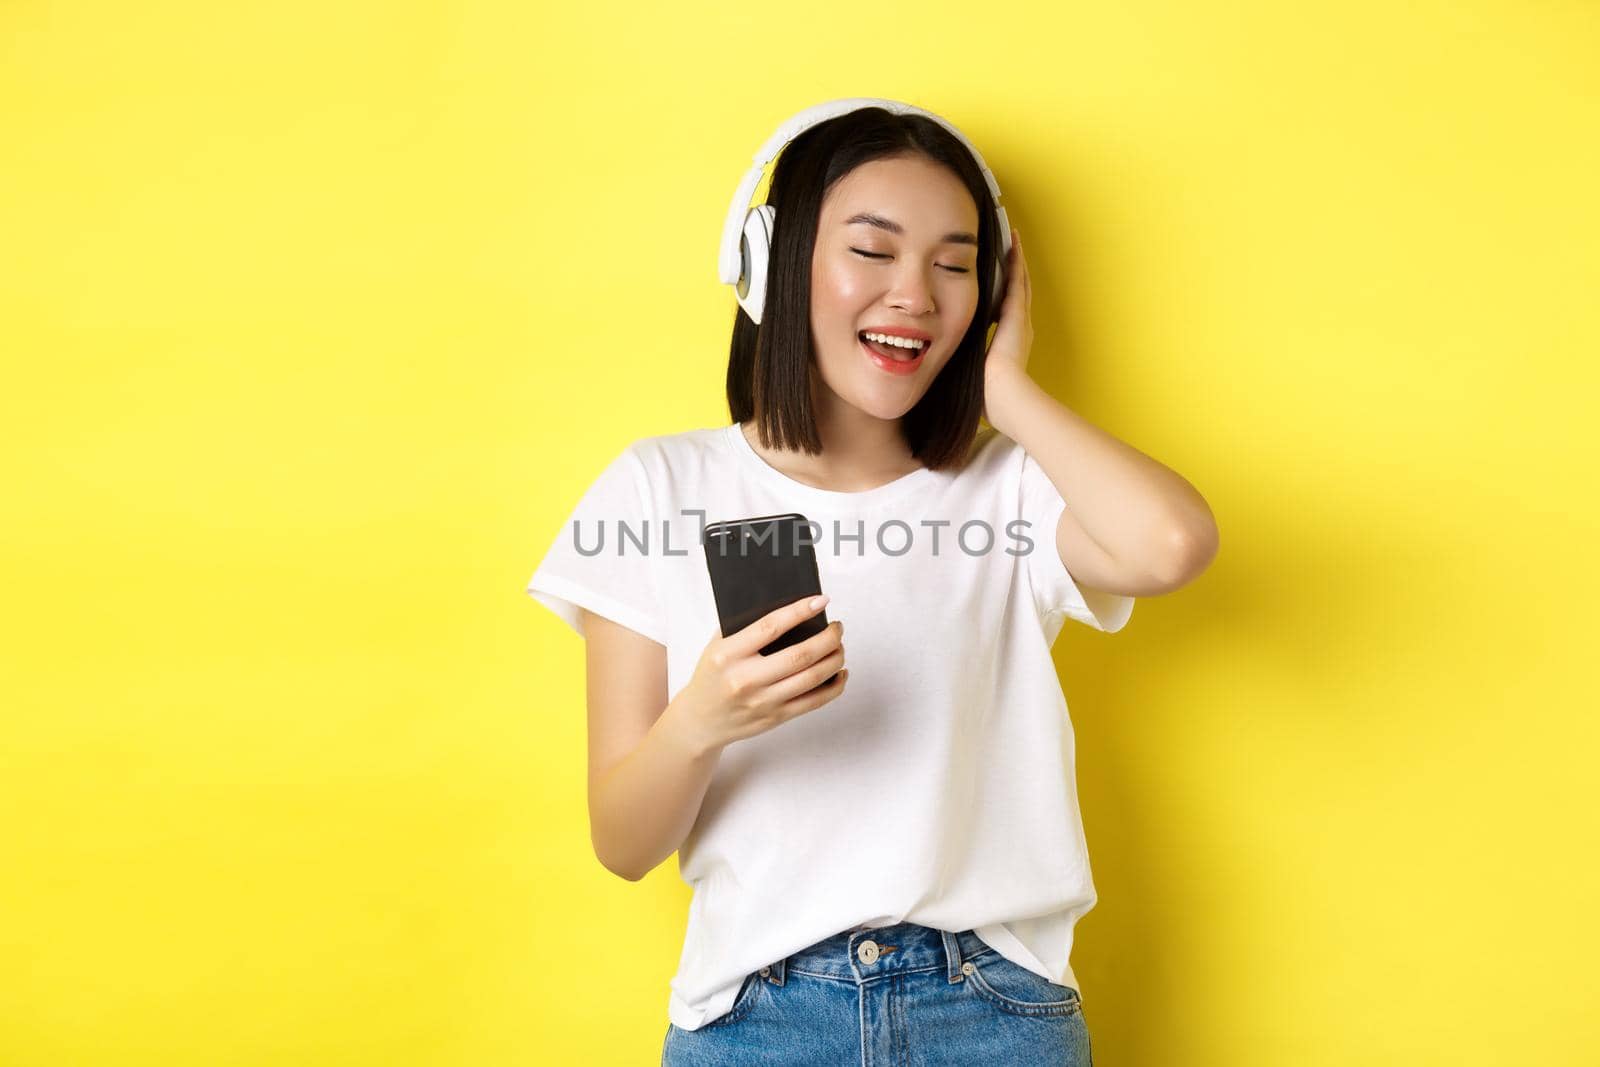 Cool asian girl singing along and listening music in wireless headphones, holding smartphone in hand, standing over yellow background.